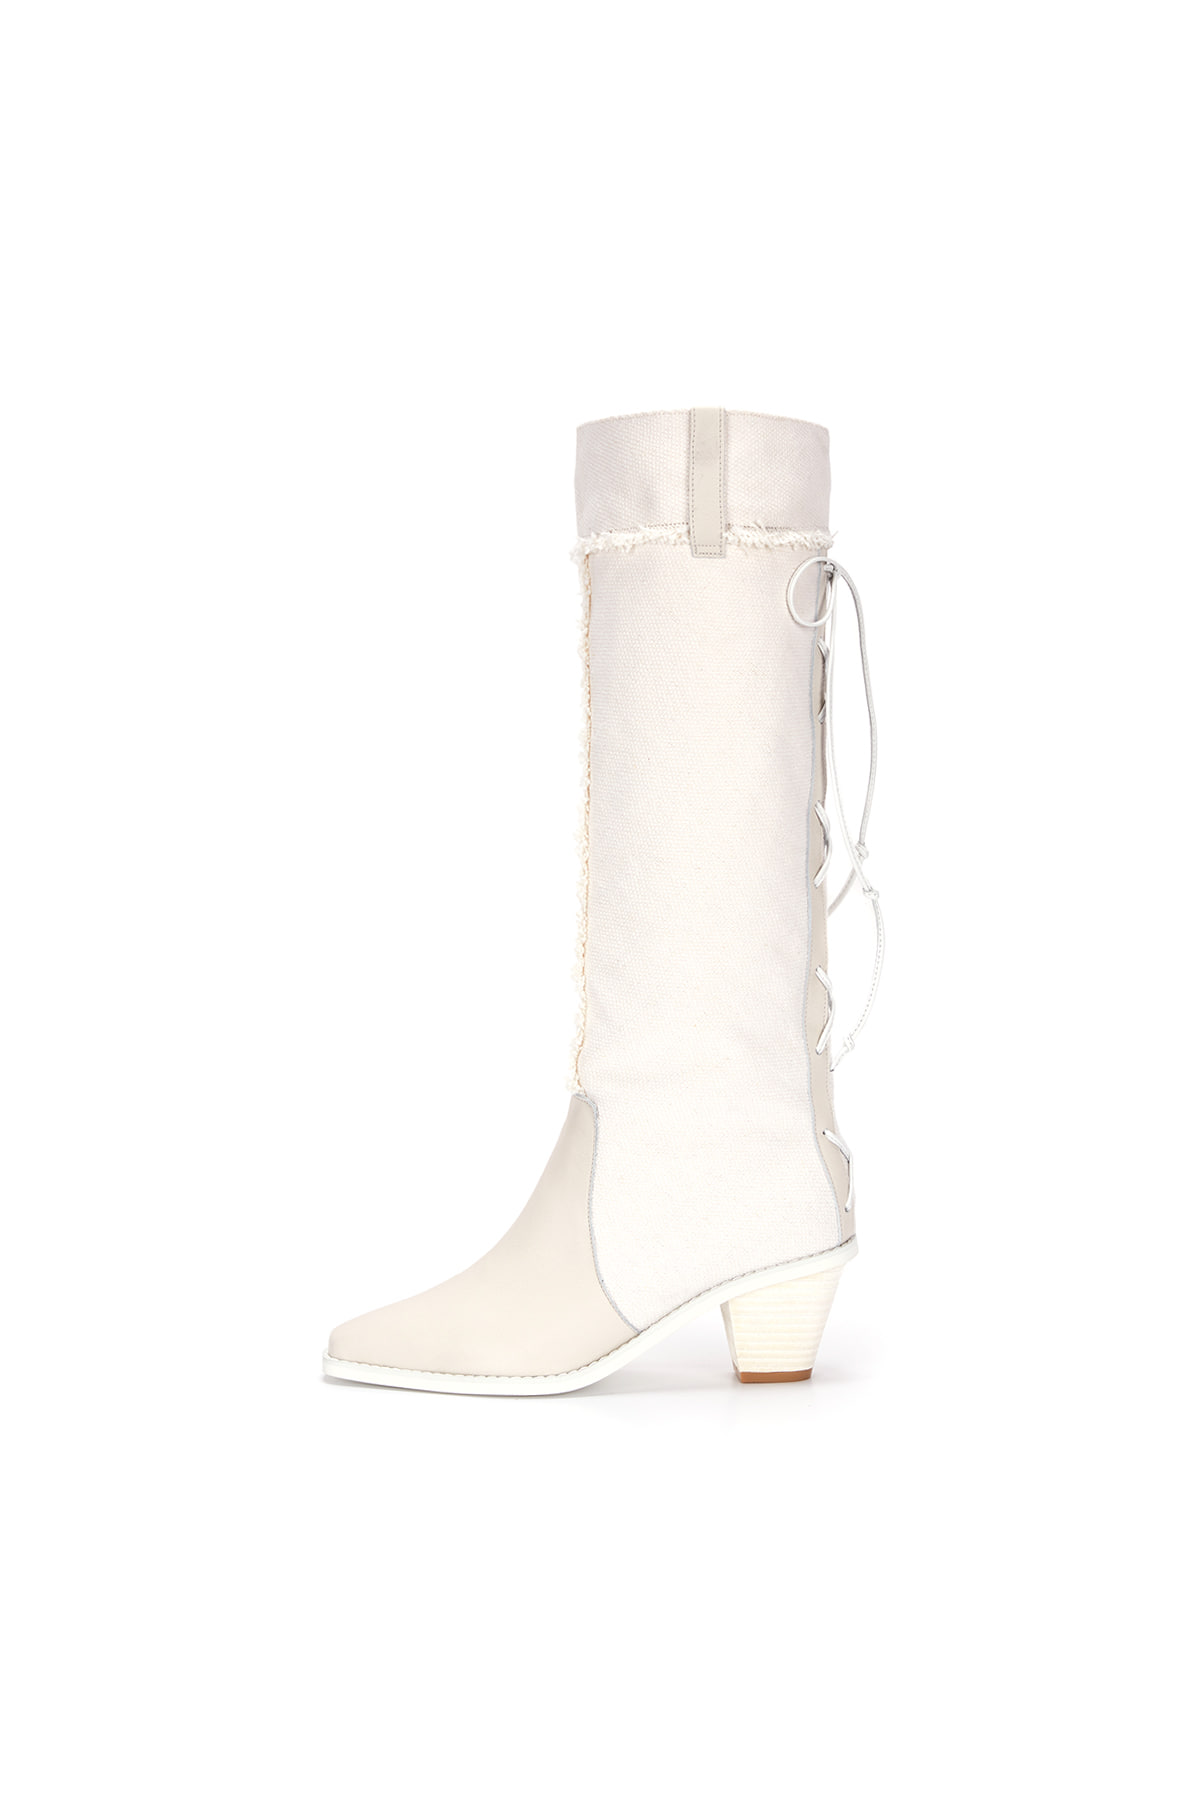 BACK RACE UP BOOTS IN WHITE